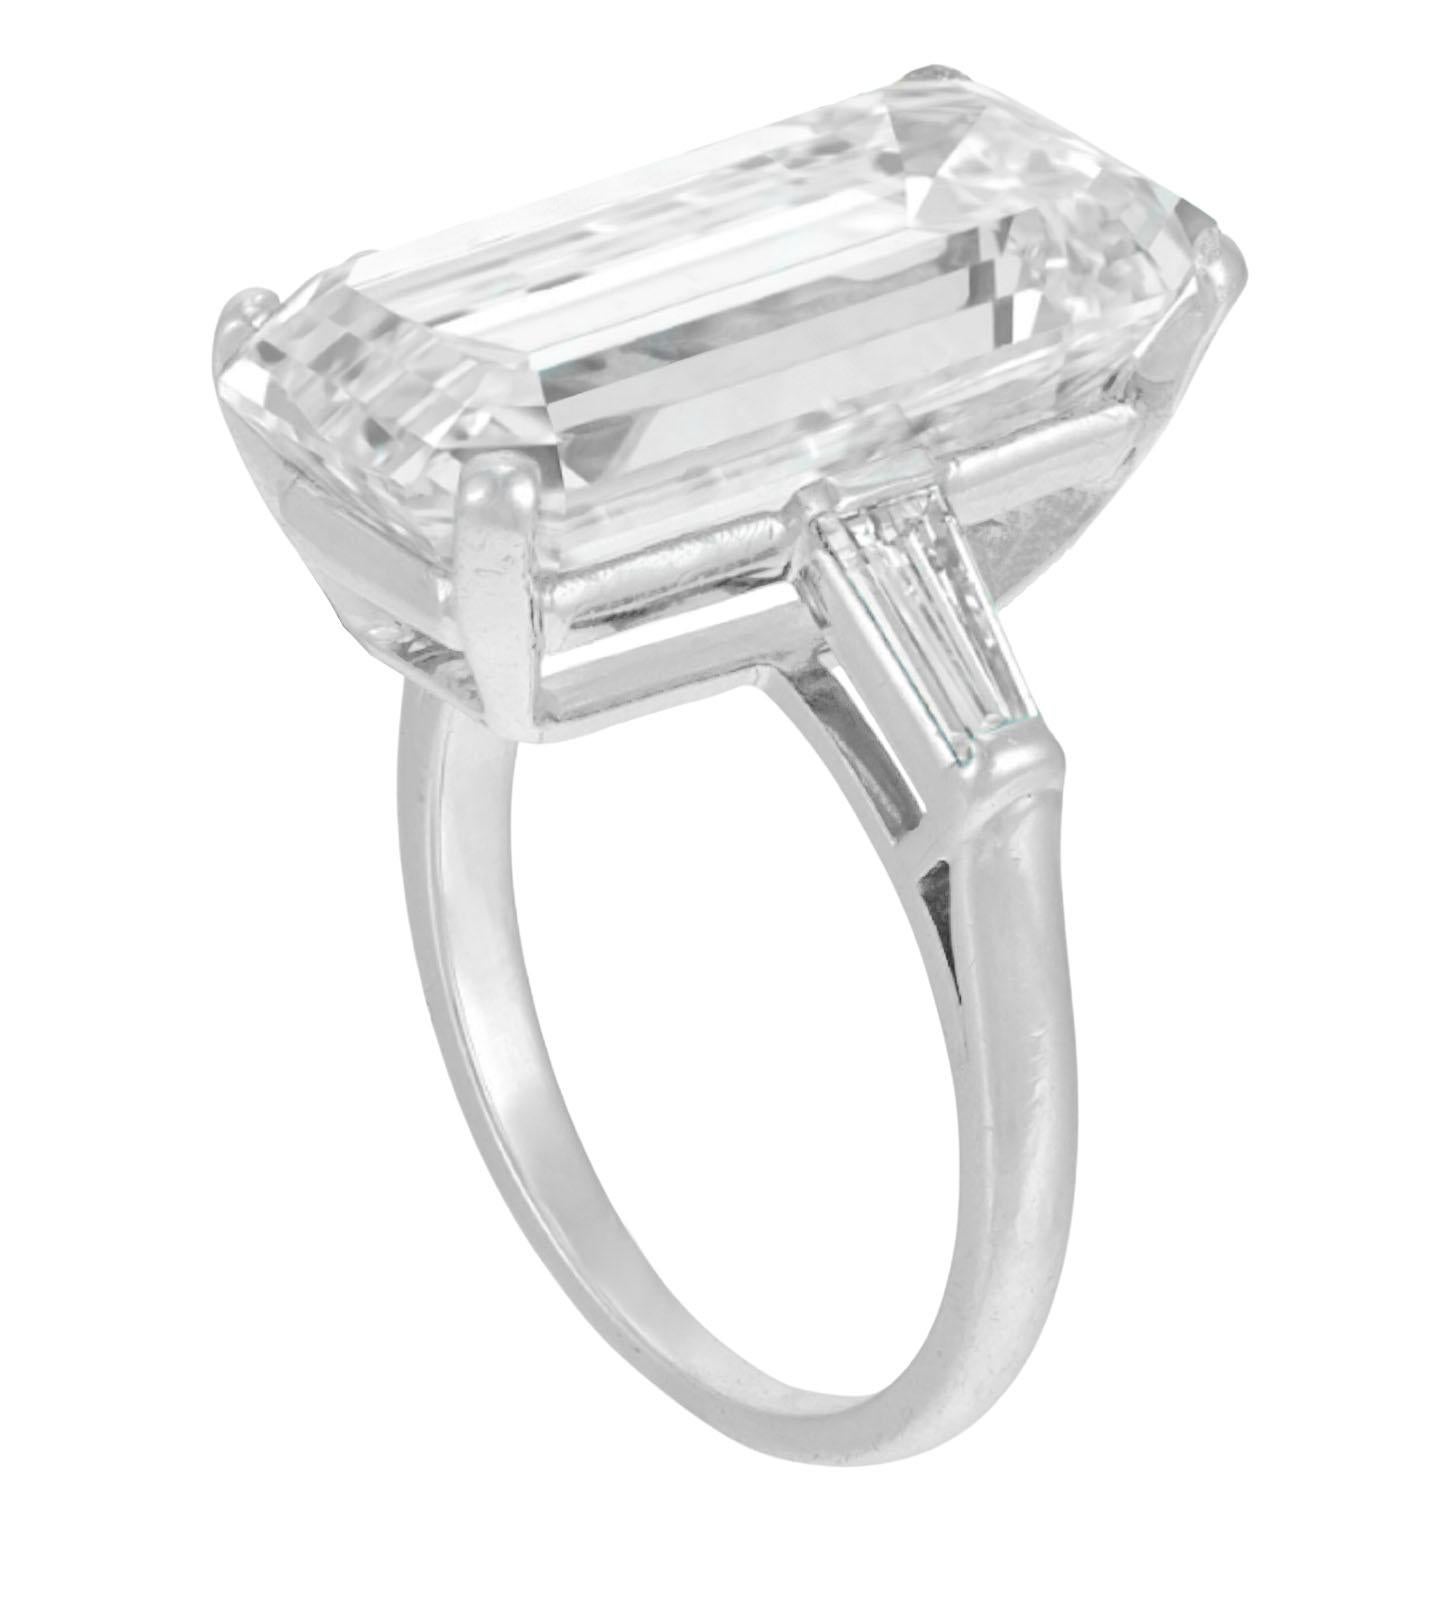 GIA Certified 8 Carat Emerald Cut Diamond Solitaire Engagement Ring. 
The main diamond is a Round Brilliant Cut diamond weighing 8 ct, E in color, VVS2 in clarity. The center stone has an Excellent Polish, Excellent Symmetry, and faint fluorescence.